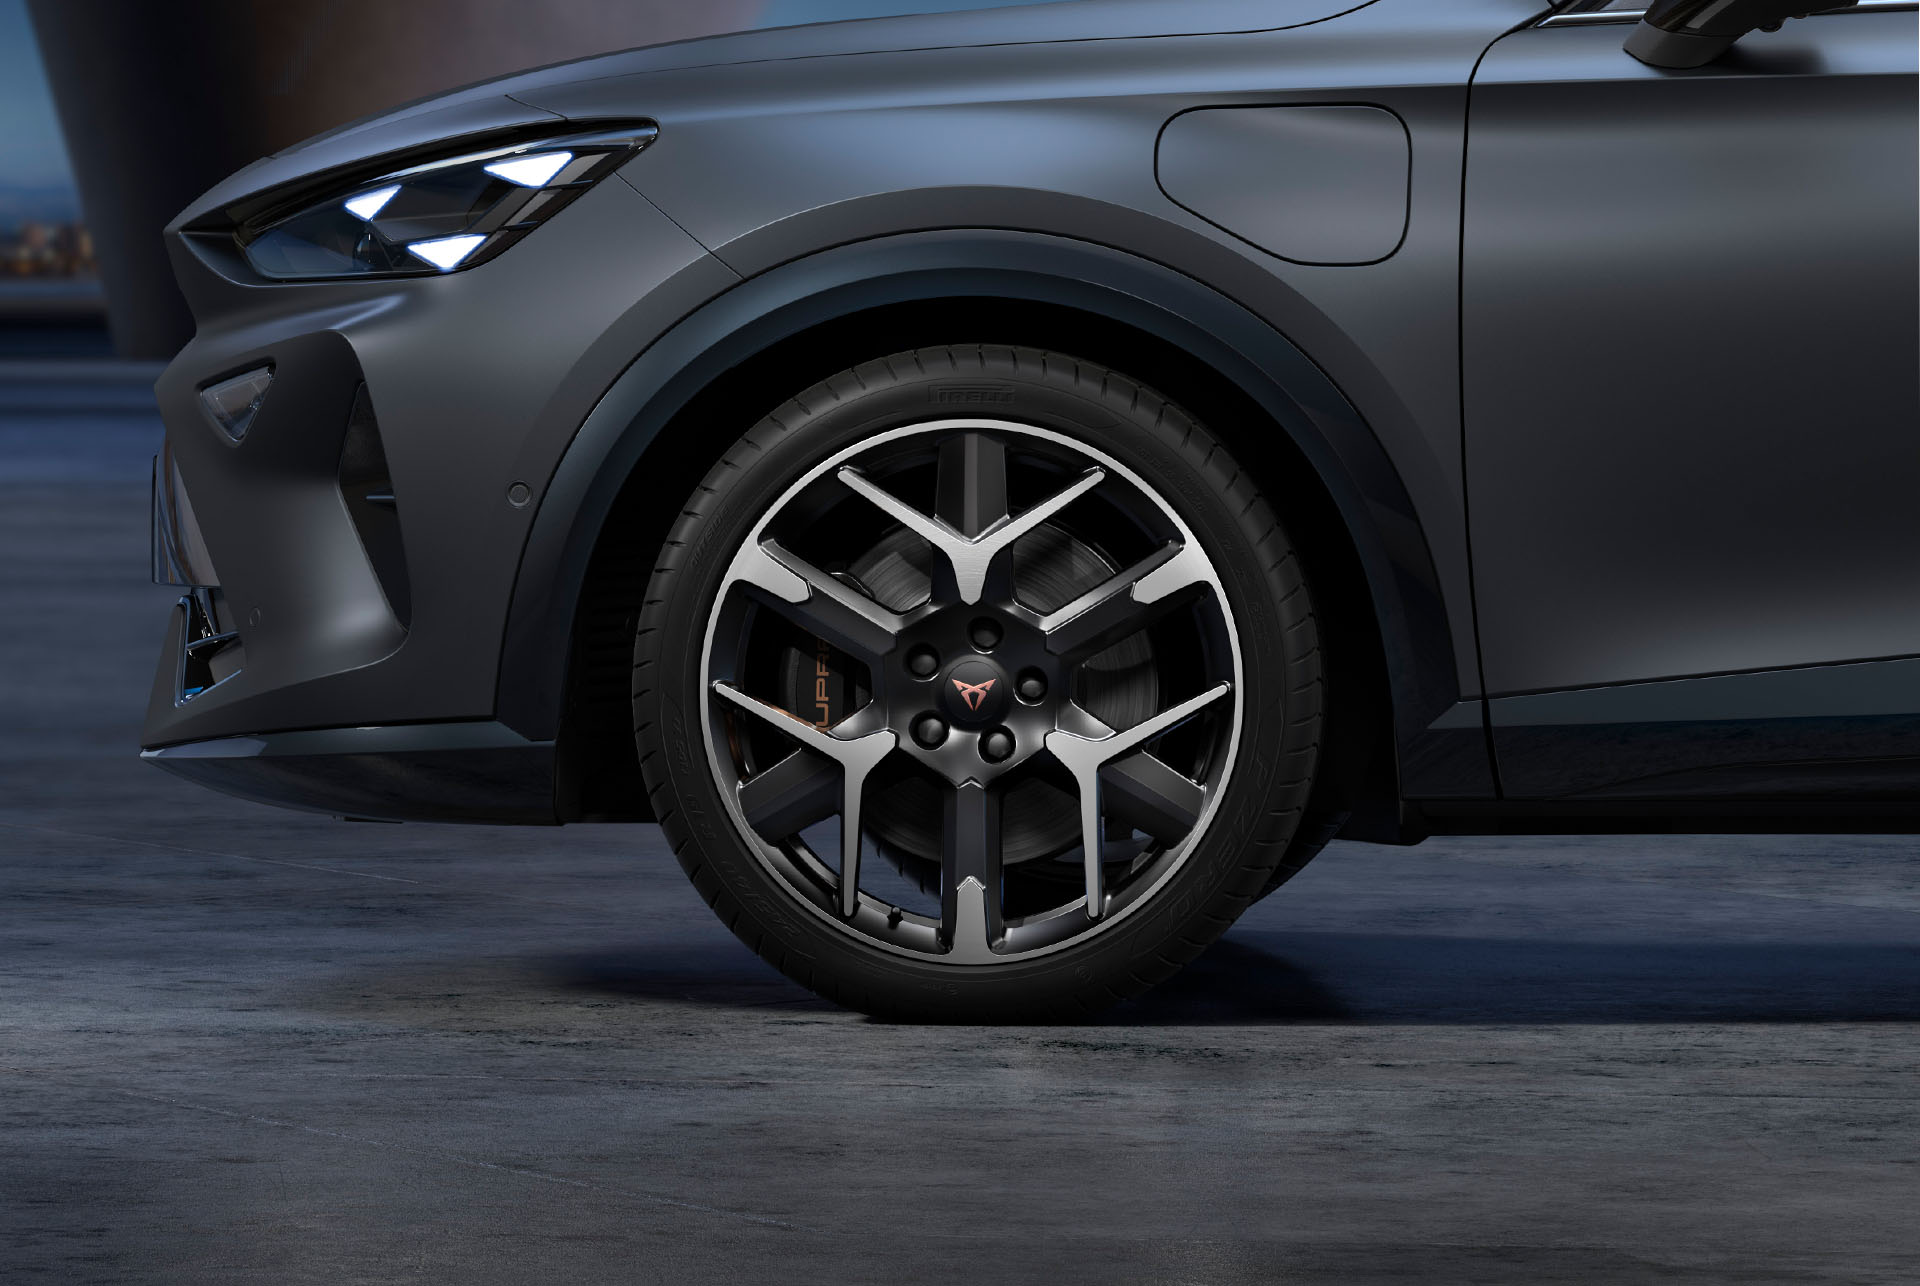 Front side view of left forged CUPRA silver and black car wheels, tyres and signature headlights.